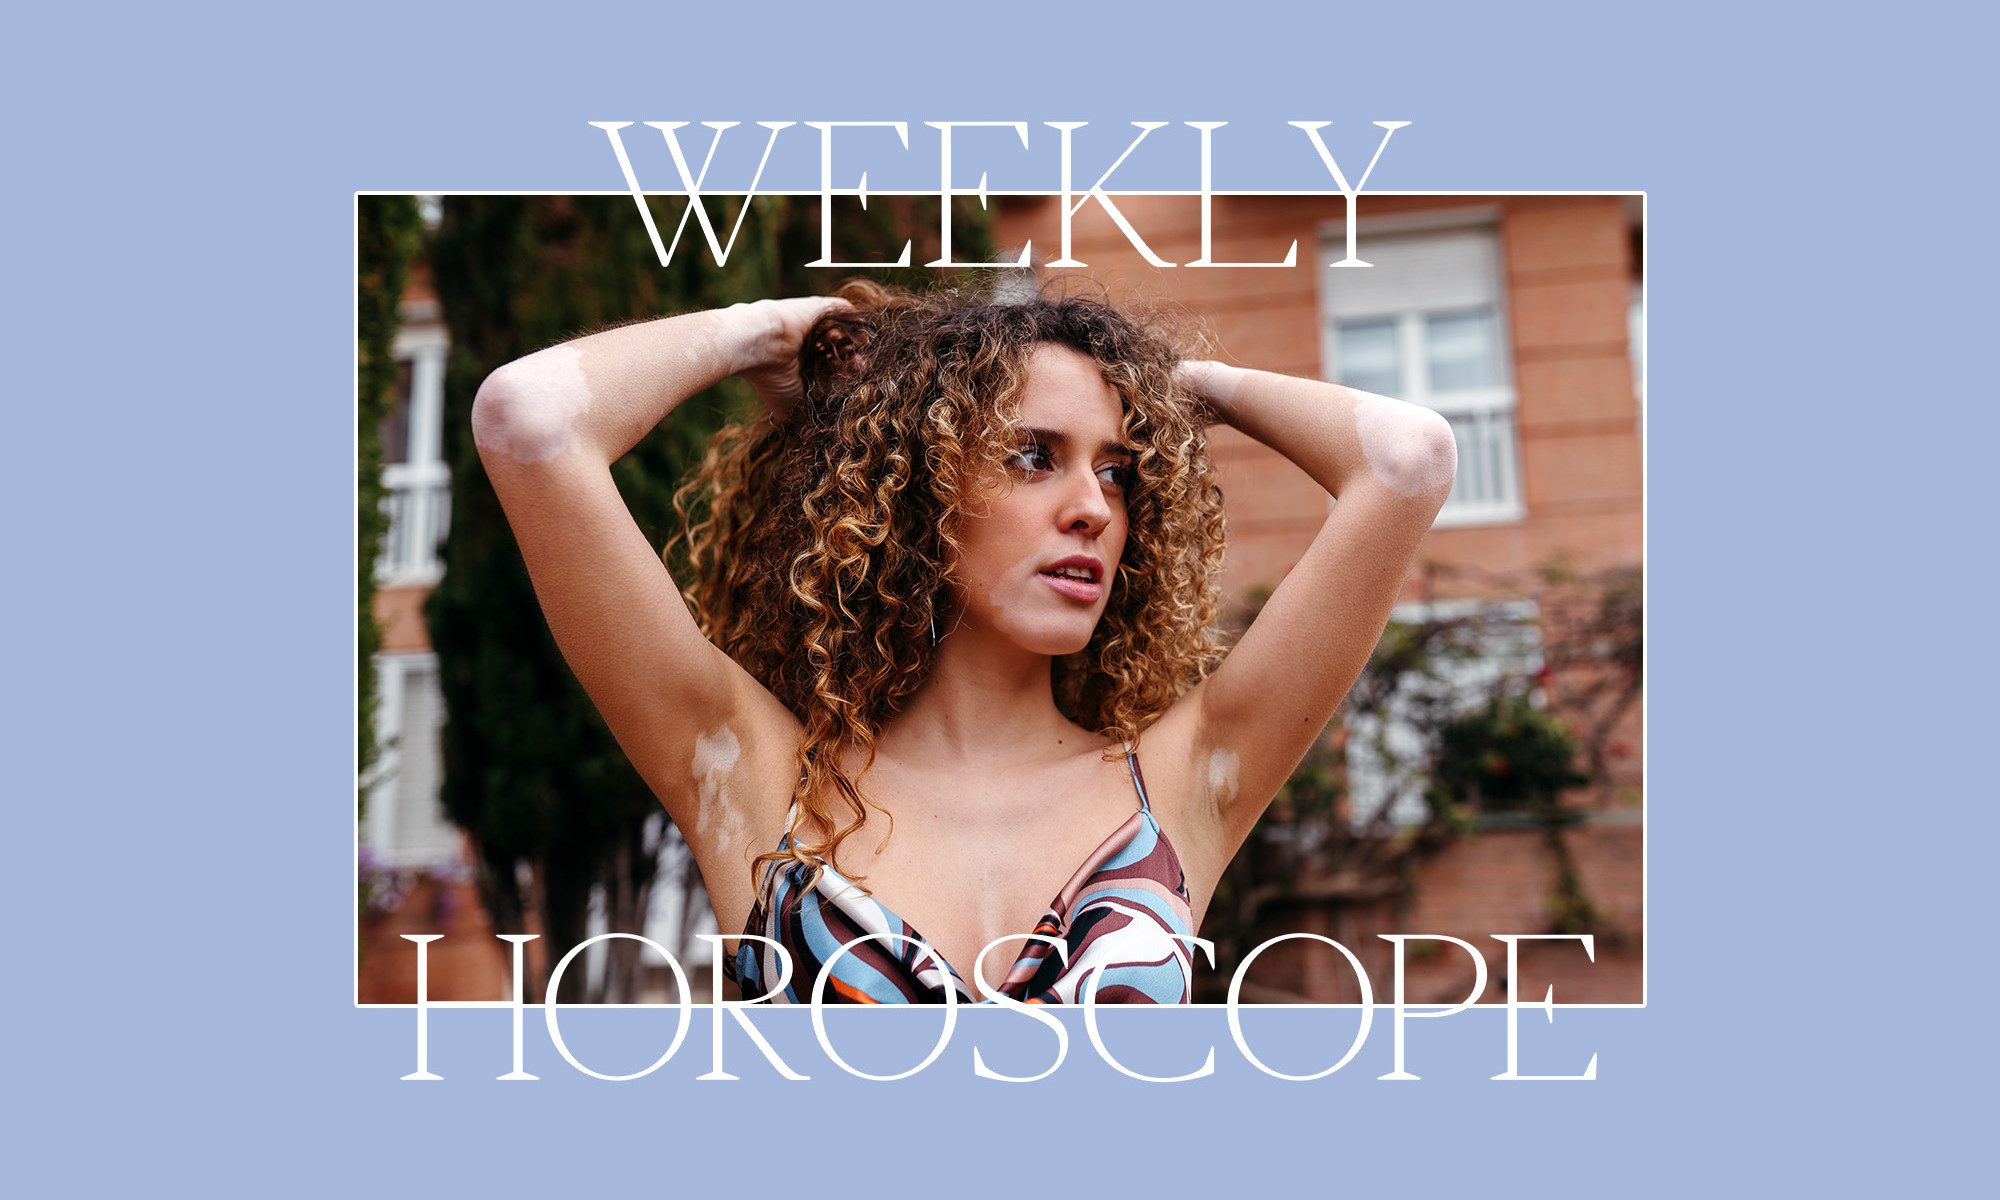 This Week Could Offer A Chance To Make Amends—Here's Your Horoscope